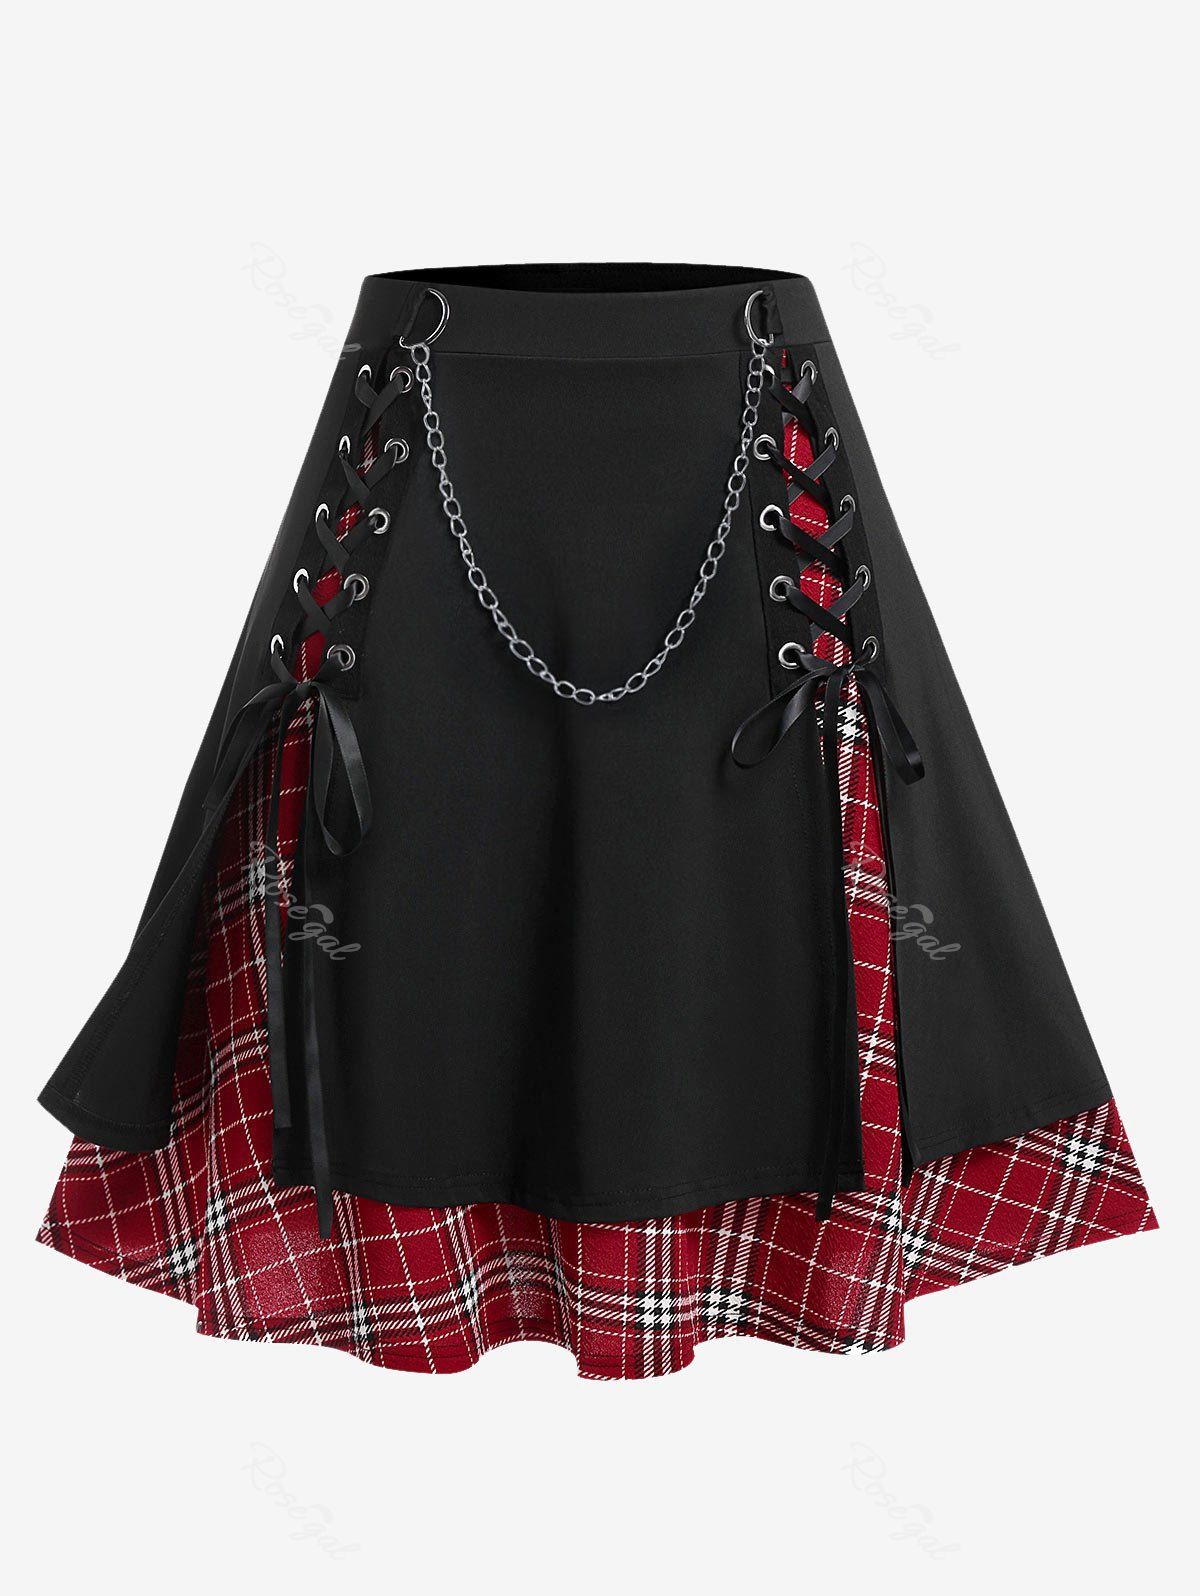 Fashion Gothic Chains Lace Up Layered Plaid Skirt  